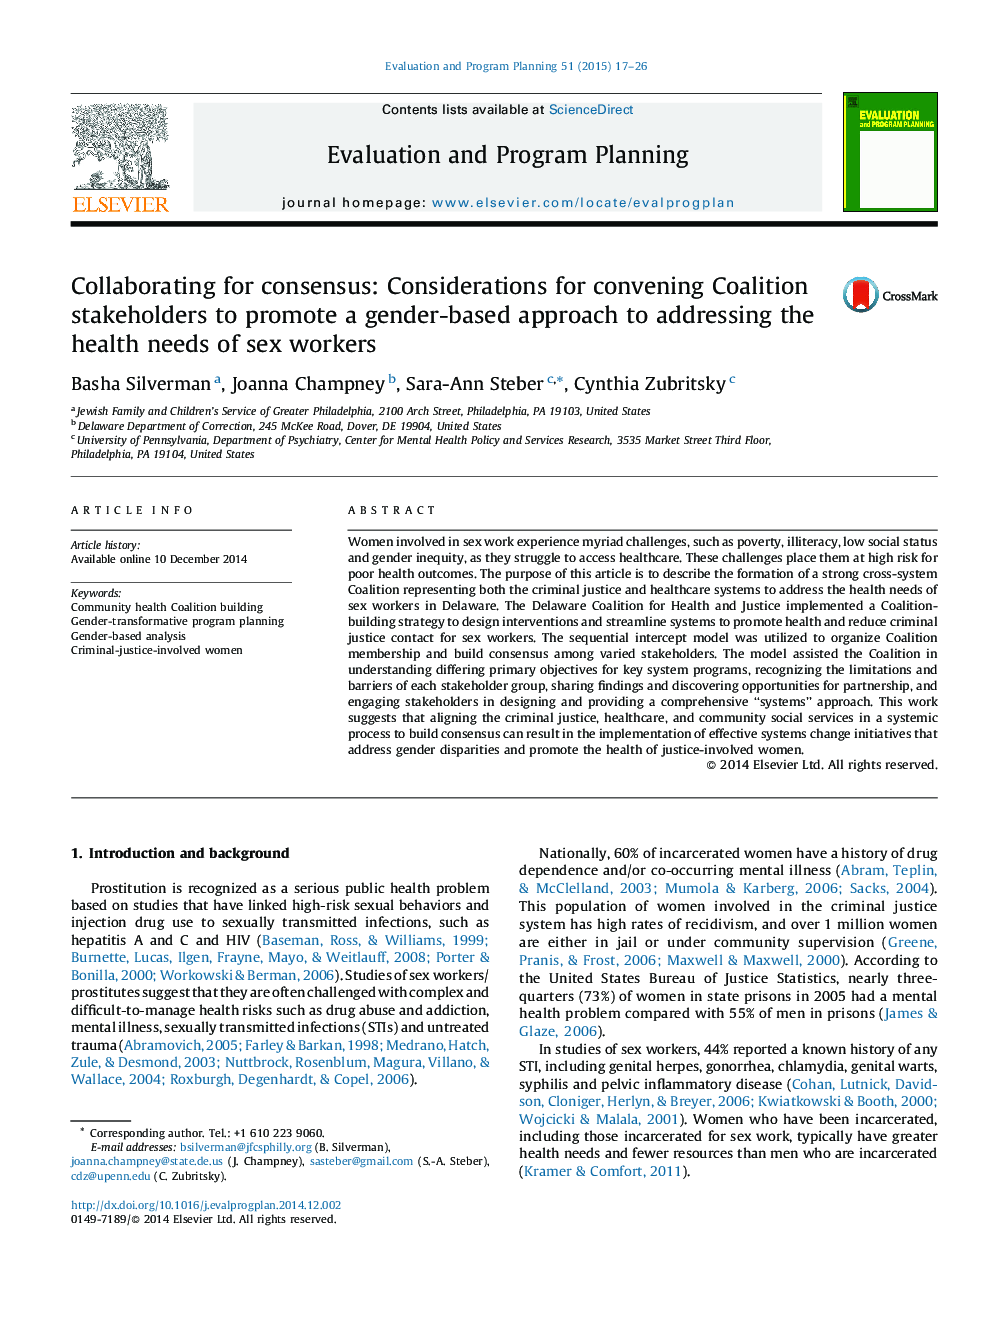 Collaborating for consensus: Considerations for convening Coalition stakeholders to promote a gender-based approach to addressing the health needs of sex workers